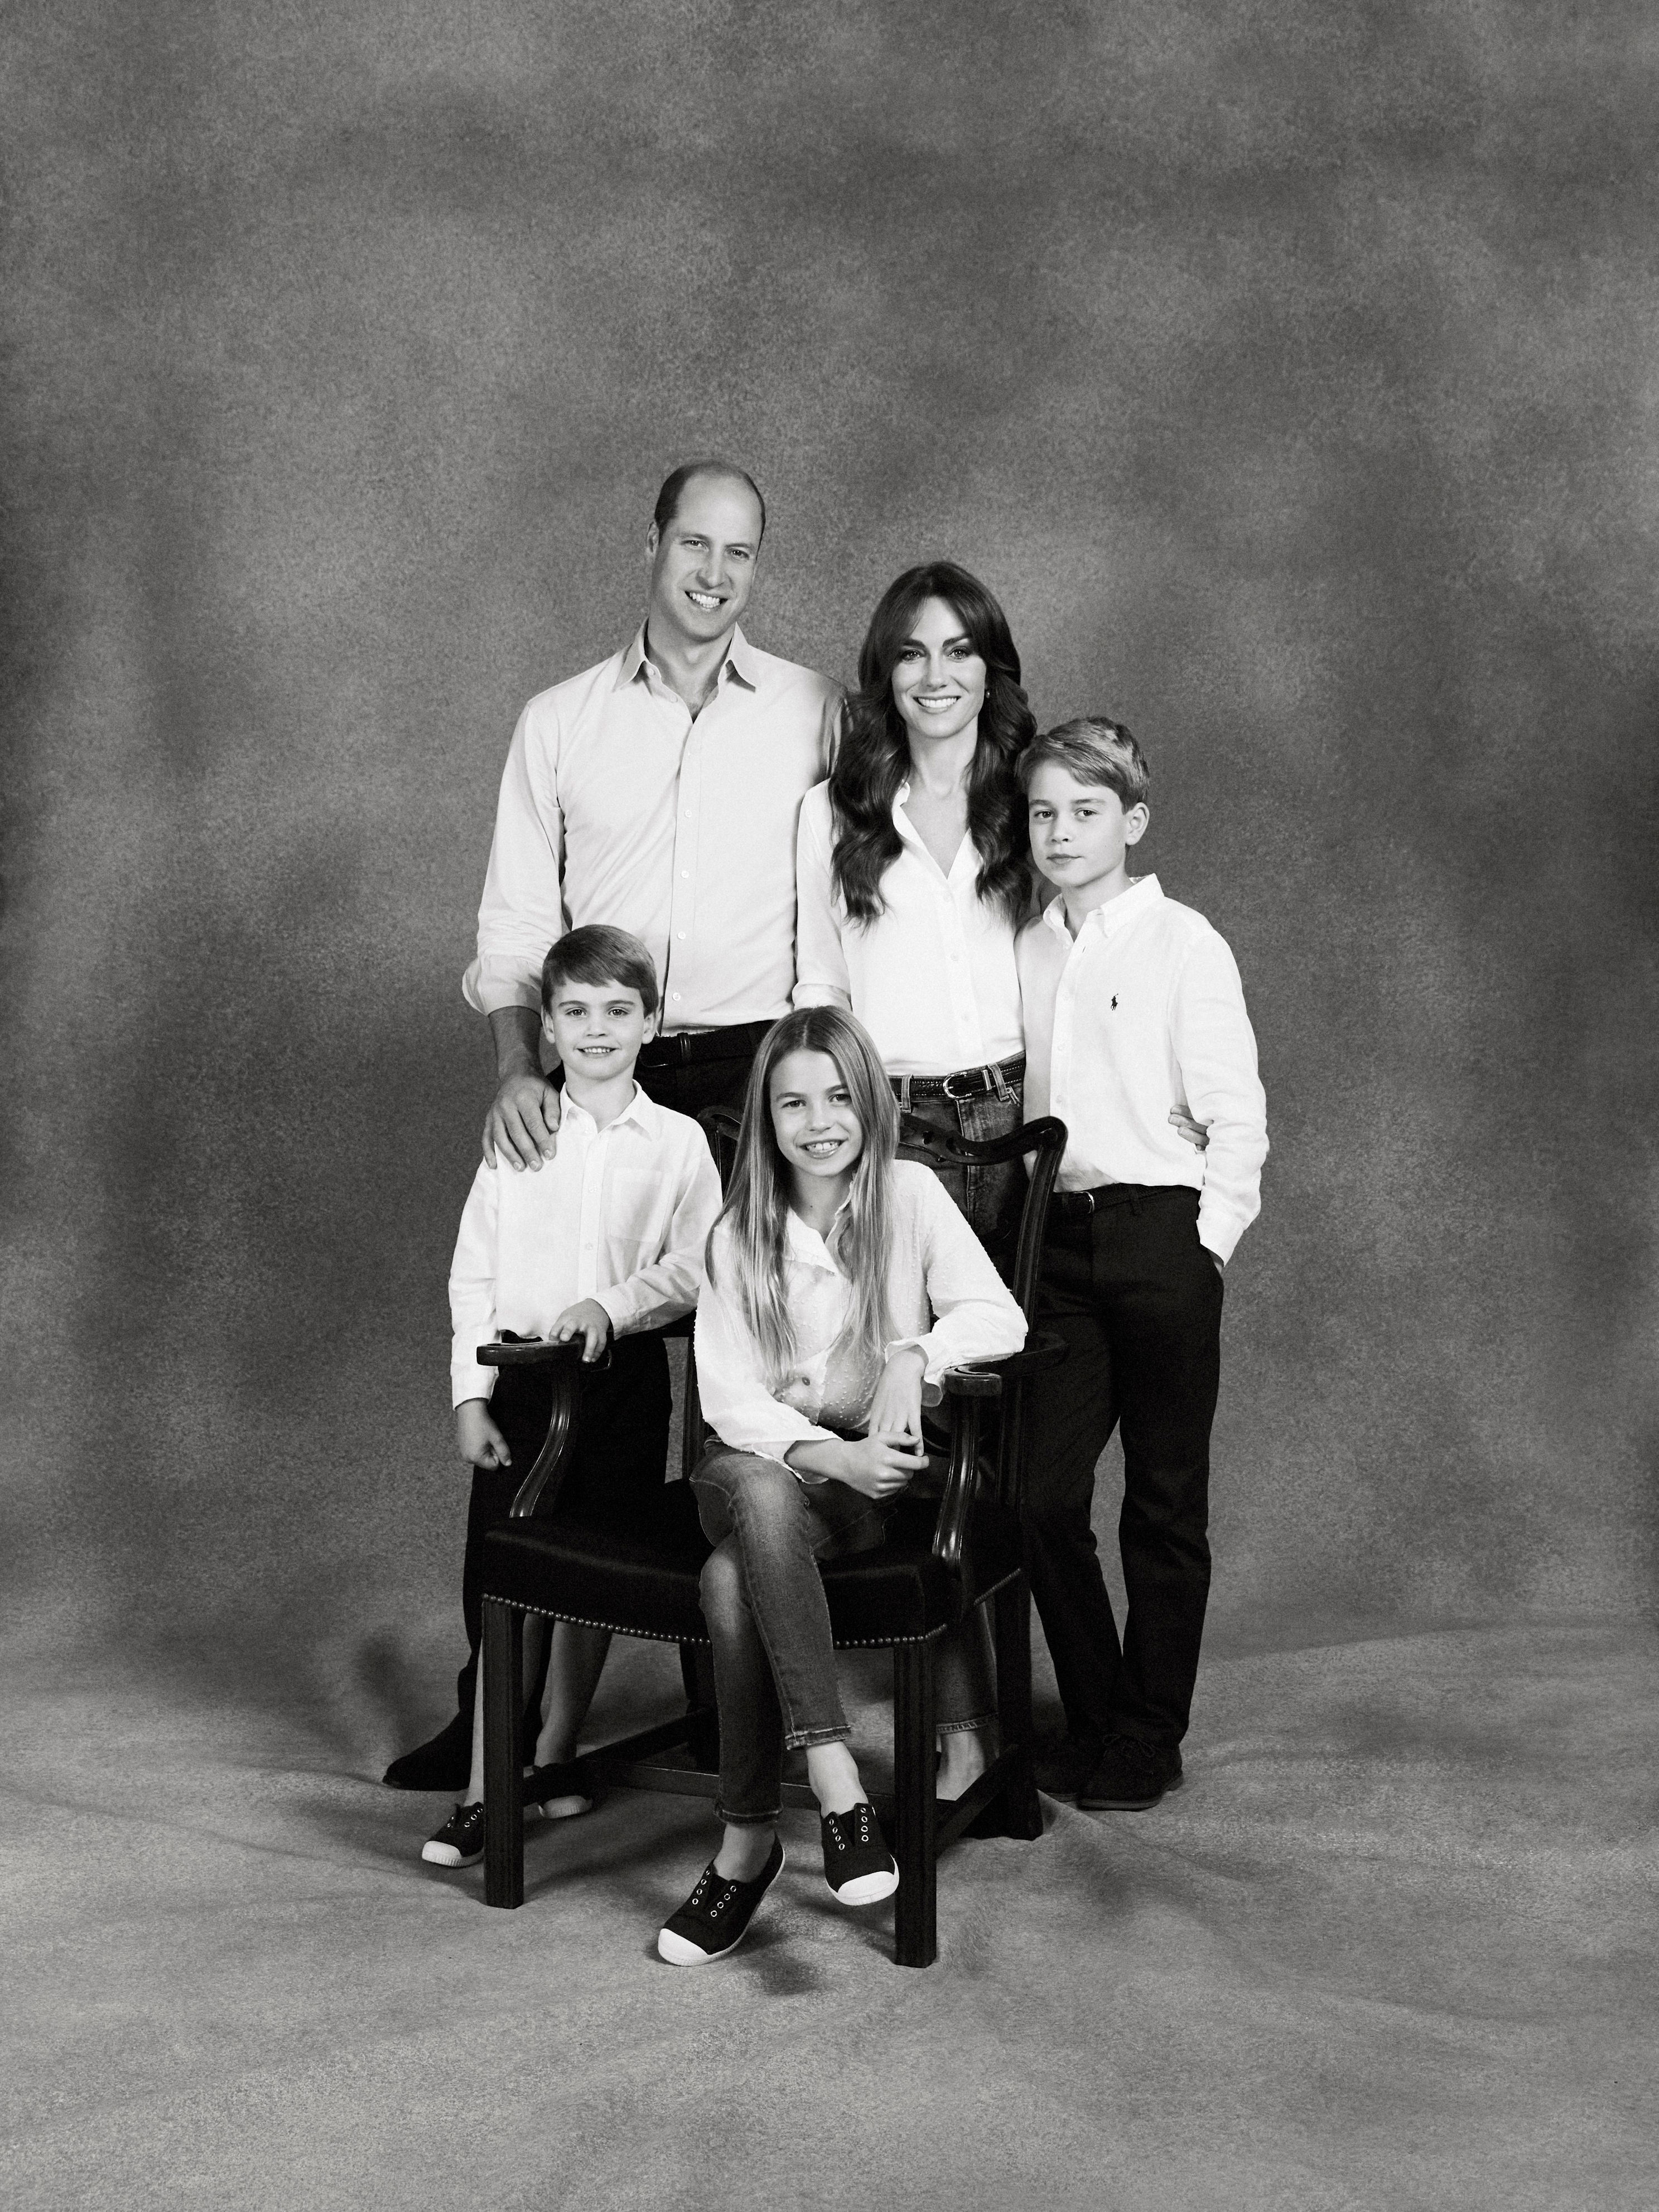 <p>On Dec. 10, 2023, Kensington Palace released this photo of <a href="https://www.wonderwall.com/celebrity/profiles/overview/prince-william-482.article">Prince William</a> and Princess Kate with their three children -- Prince George, Princess Charlotte and Prince Louis -- which is featured on their Royal Highnesses' 2023 Christmas card. The image was taken by photographer Josh Shinner in Windsor, England, earlier in the year. </p>